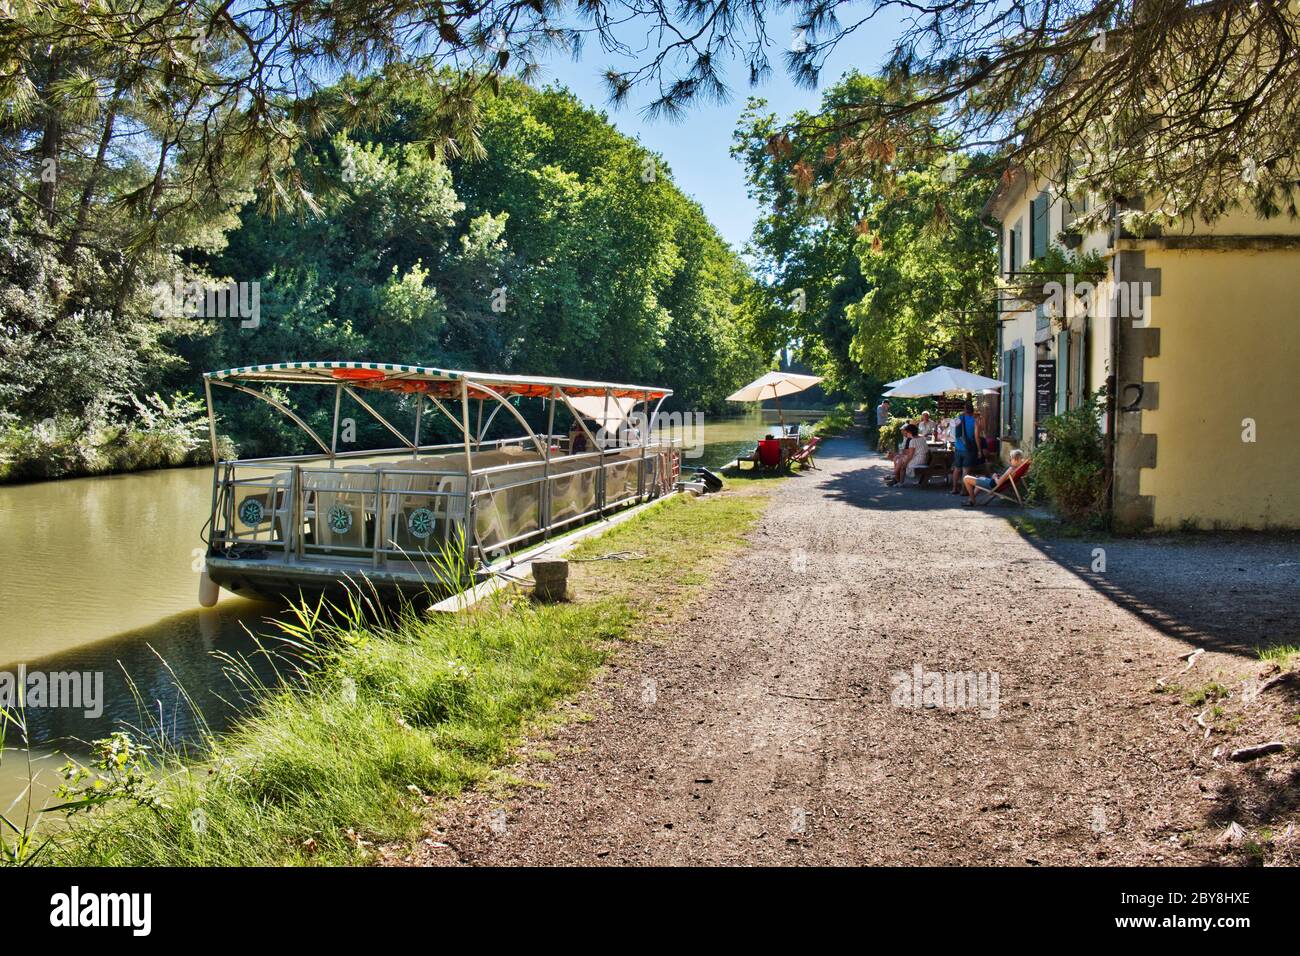 Carcassonne Aude France 07/11/19 Canal du Midi tow path and lock keepers cottage. Canal tour boat moored beside a cafe. Hoiday makers enjoying a cool Stock Photo